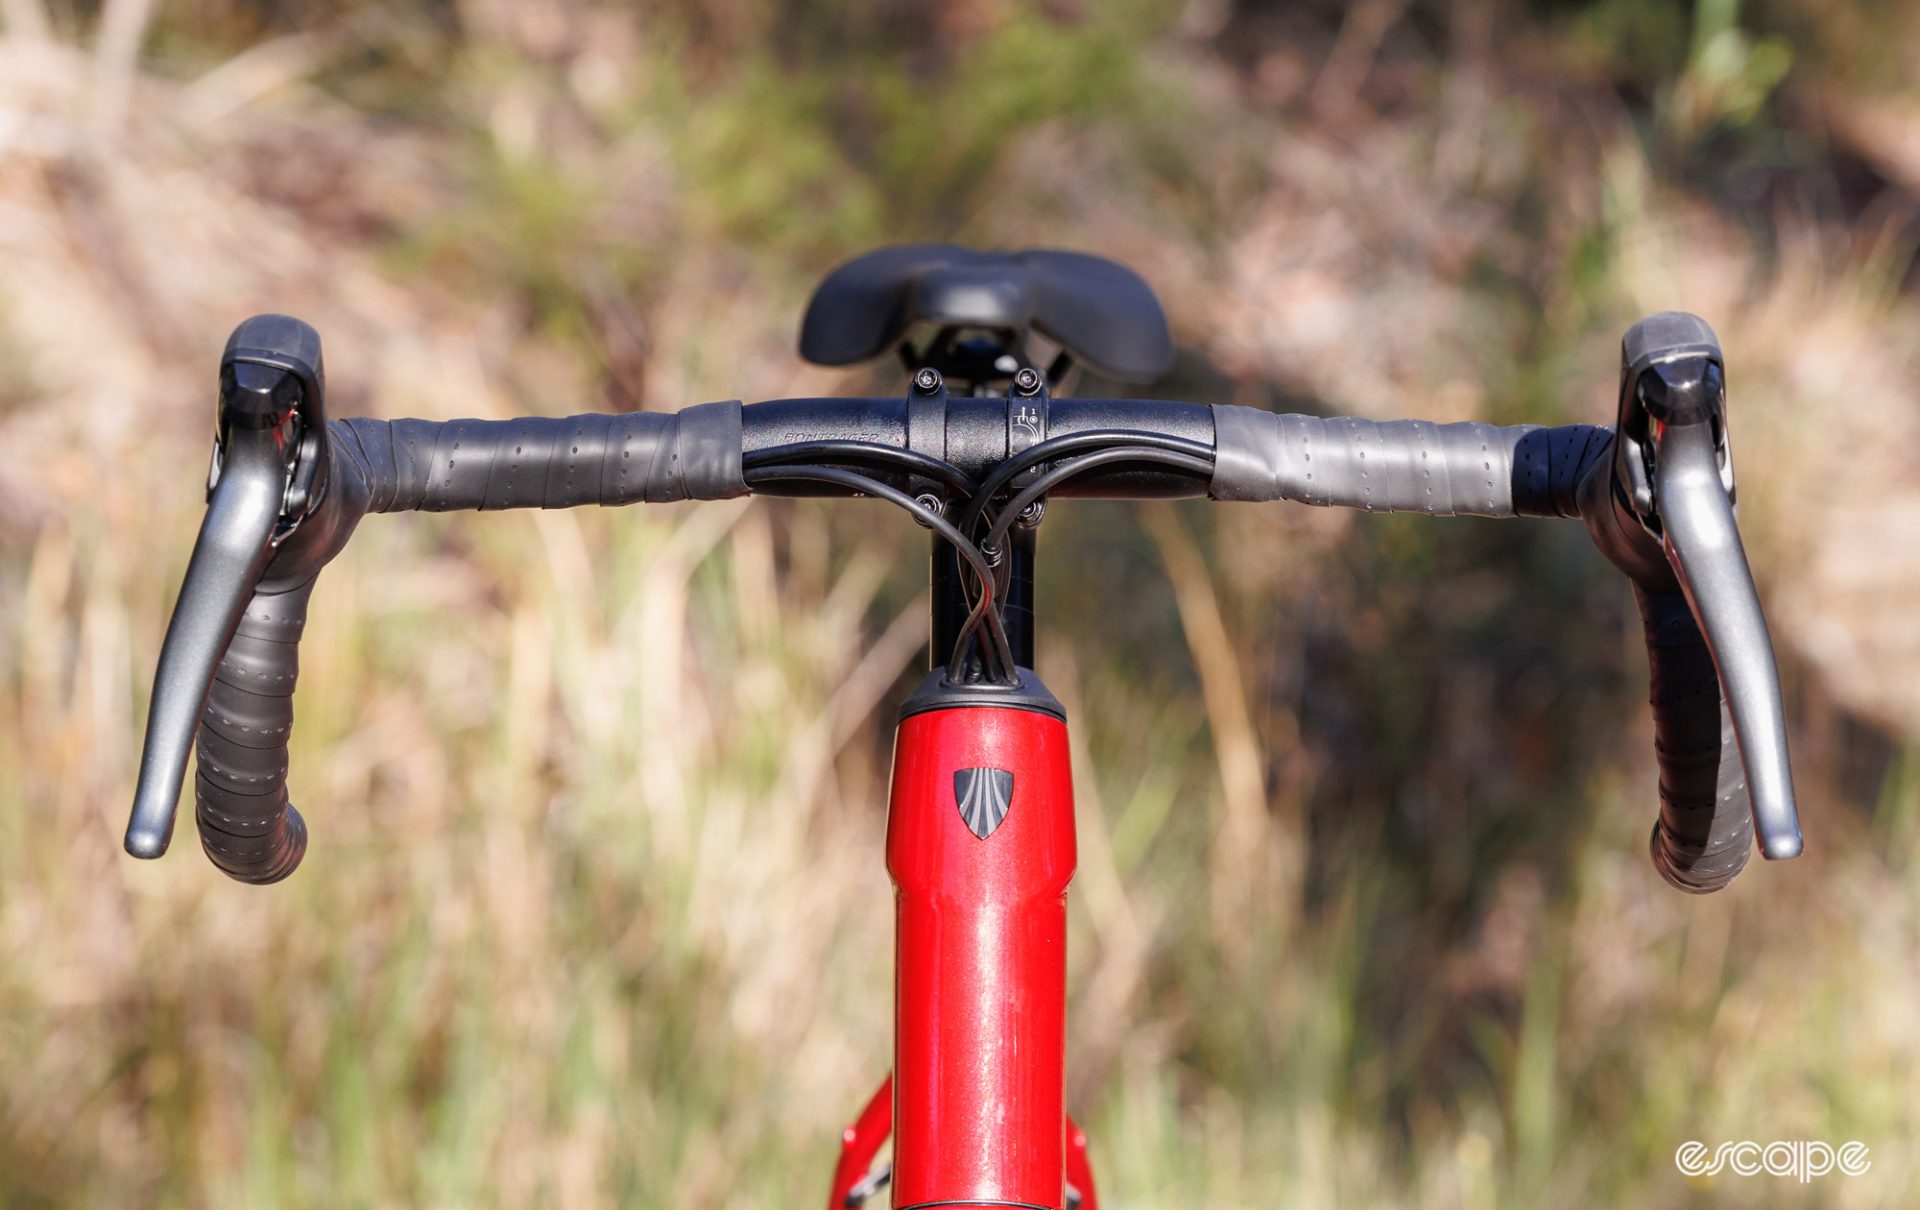 A front on view showing the flared handlebars.